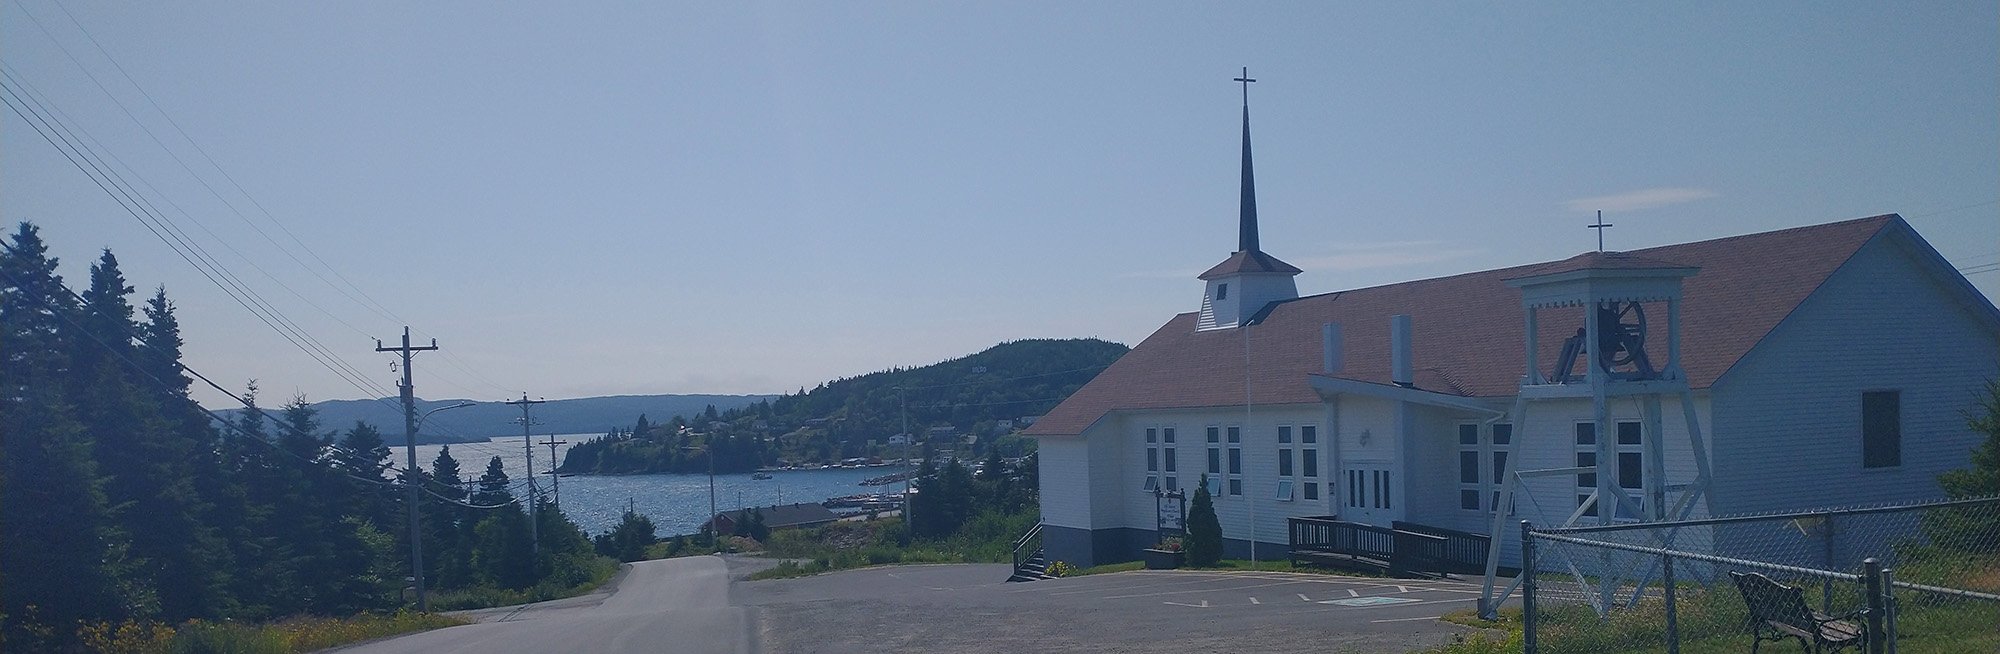 View of the town as you come down the little hill into it. Church, hill, marina. Cove town.